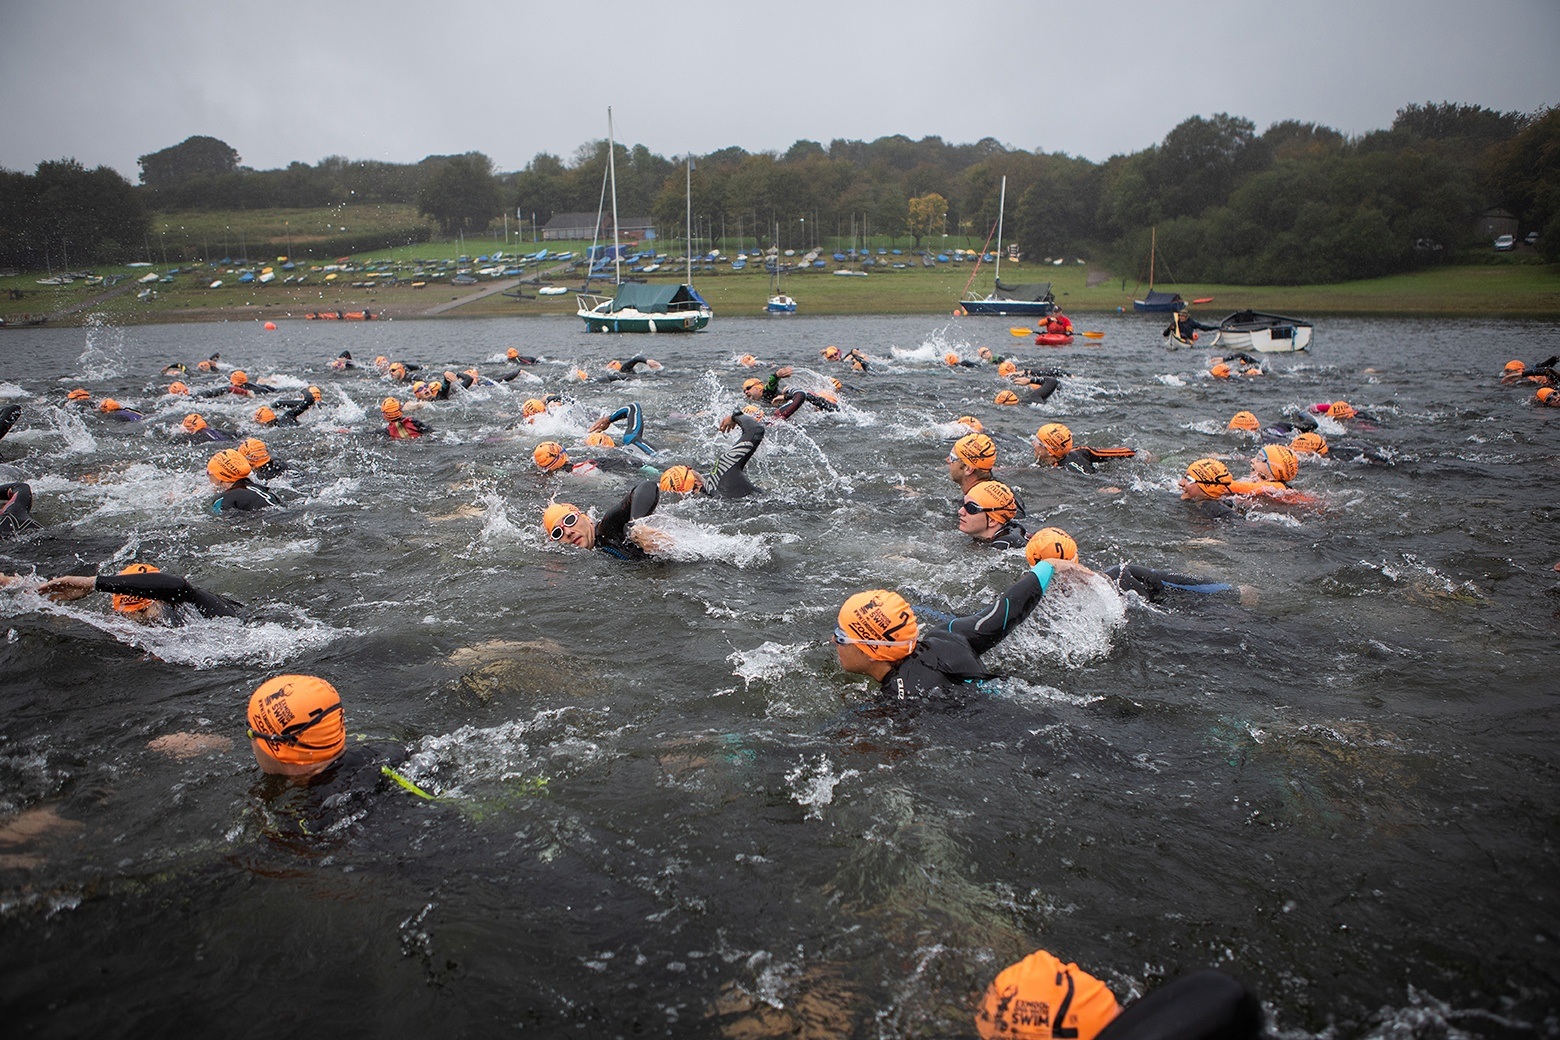 The-Exmoor-Open-Swim-CREDIT-Howaboutdave-Photography